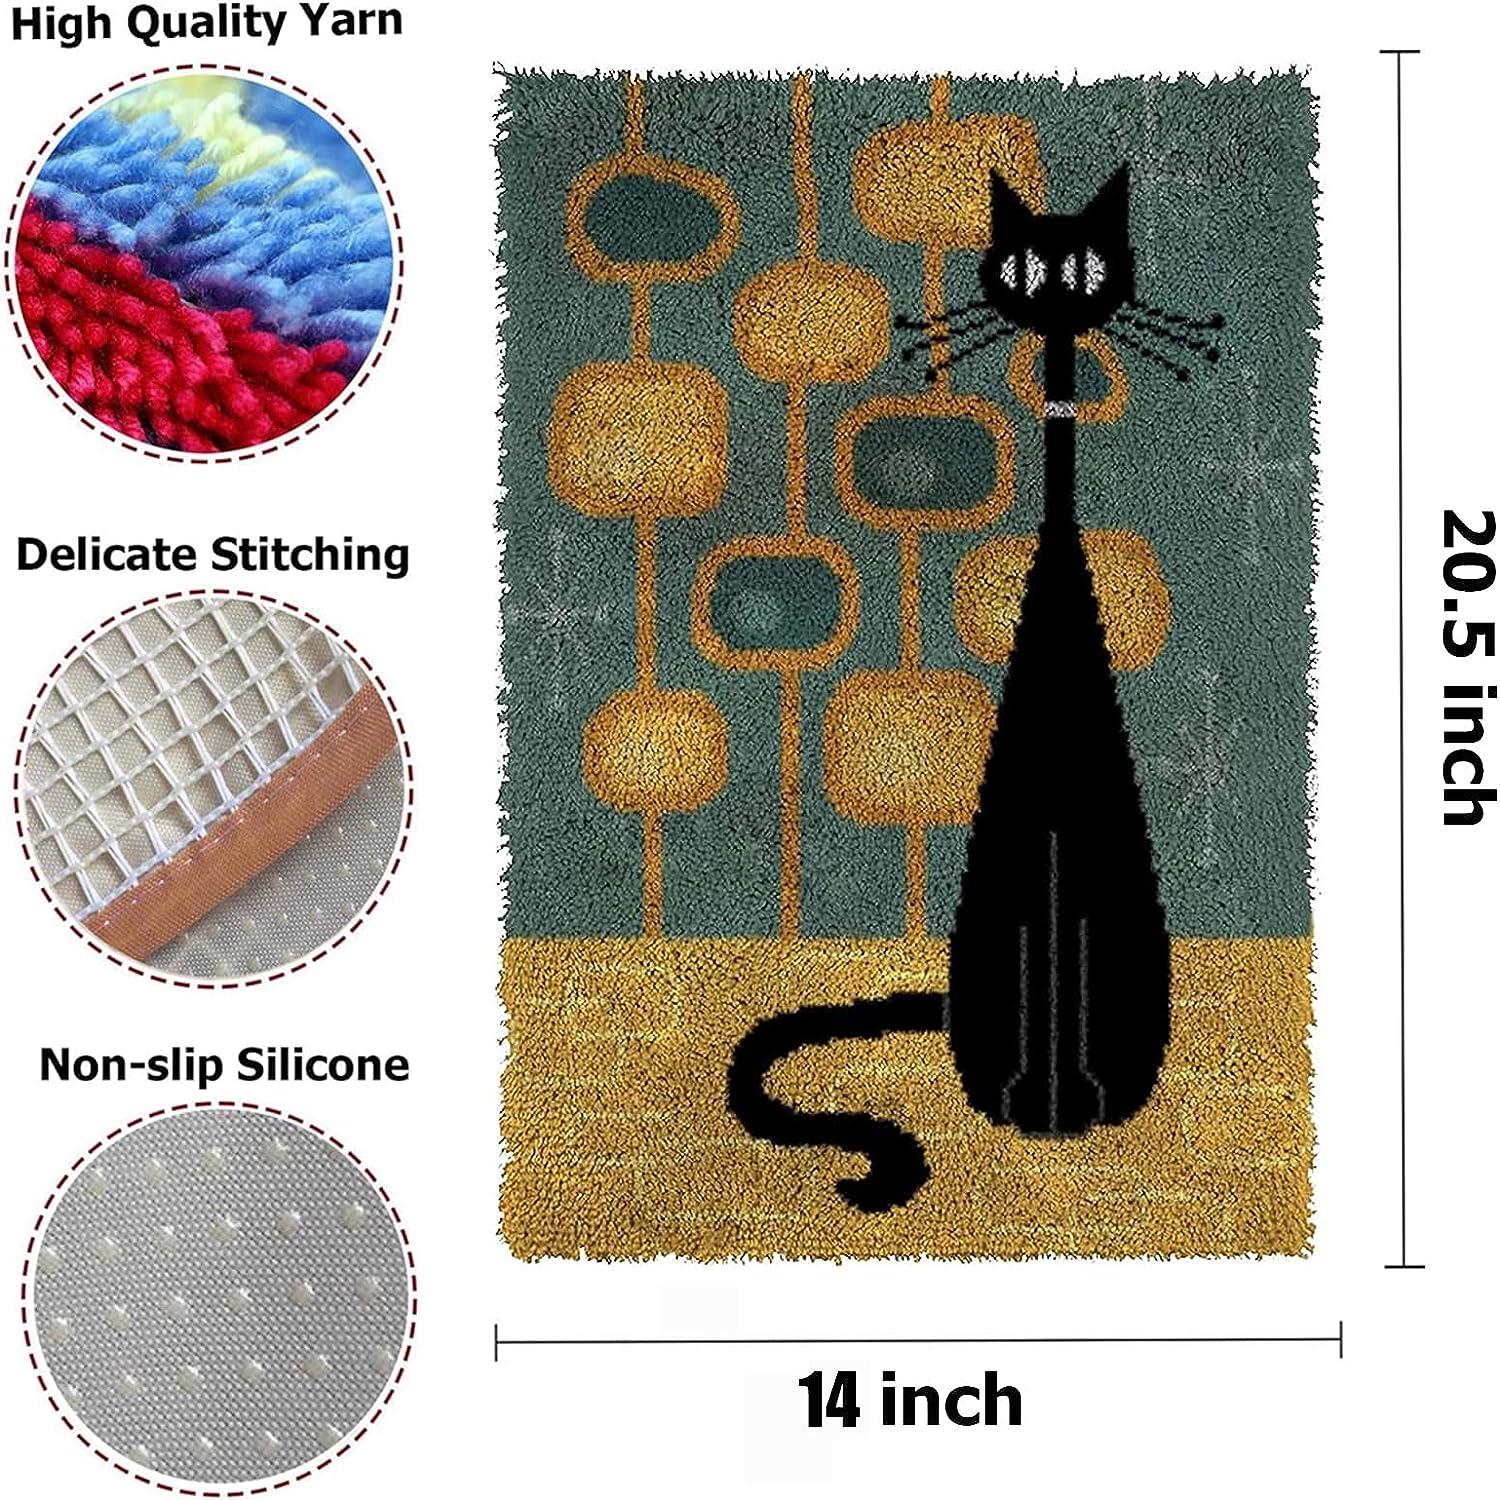 EVAJE Latch Hook Rug Kit for Adults DIY Crochet Yarn Kits with Color Printed  Canvas Black Cat Pattern Rug Making Craft Embroidery Tapestry Set Home Decor  Festival Gift 20.5''X14